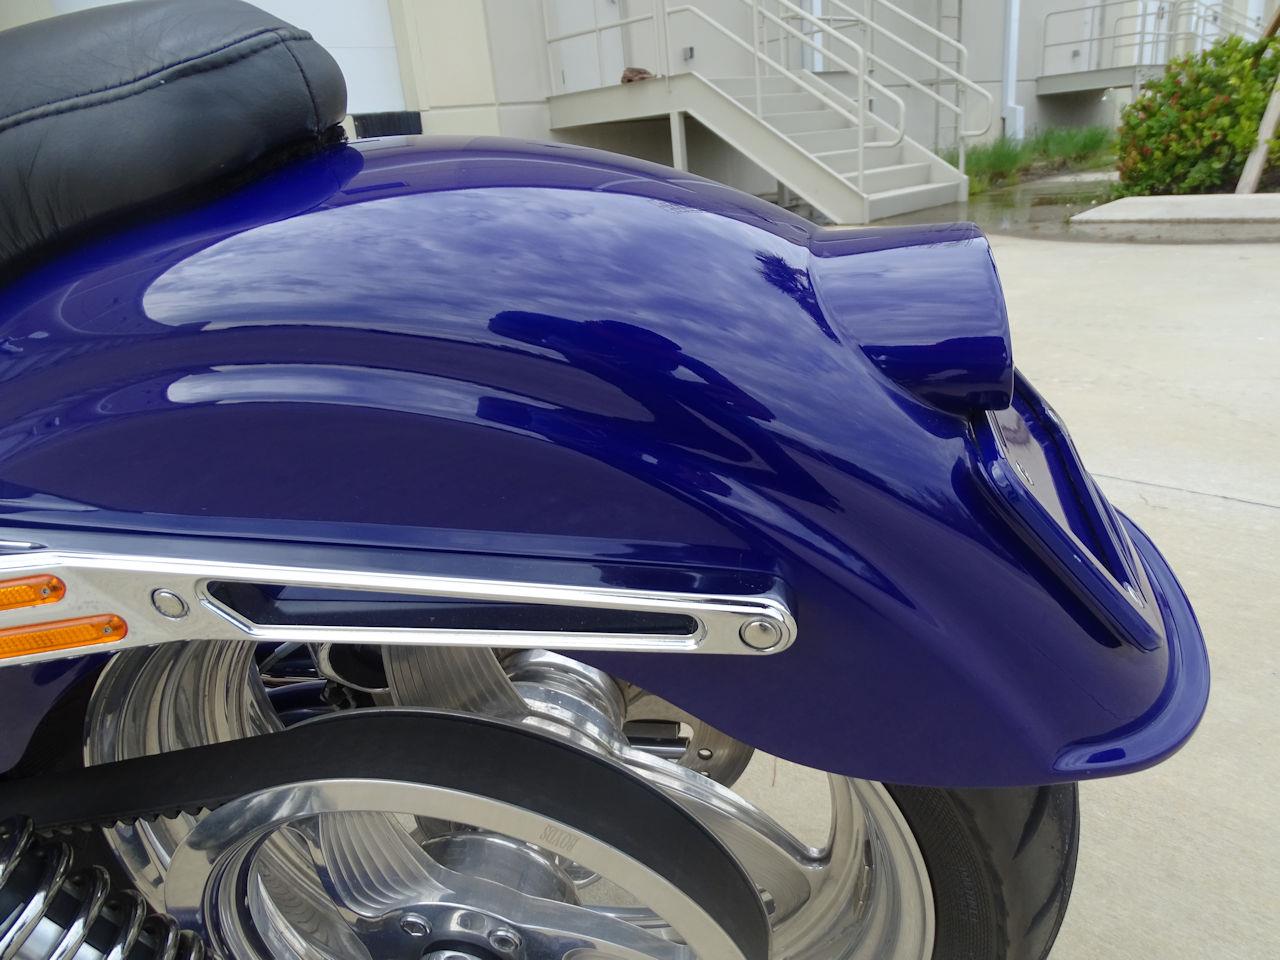 2002 Custom Motorcycle for sale in O'Fallon, IL – photo 20